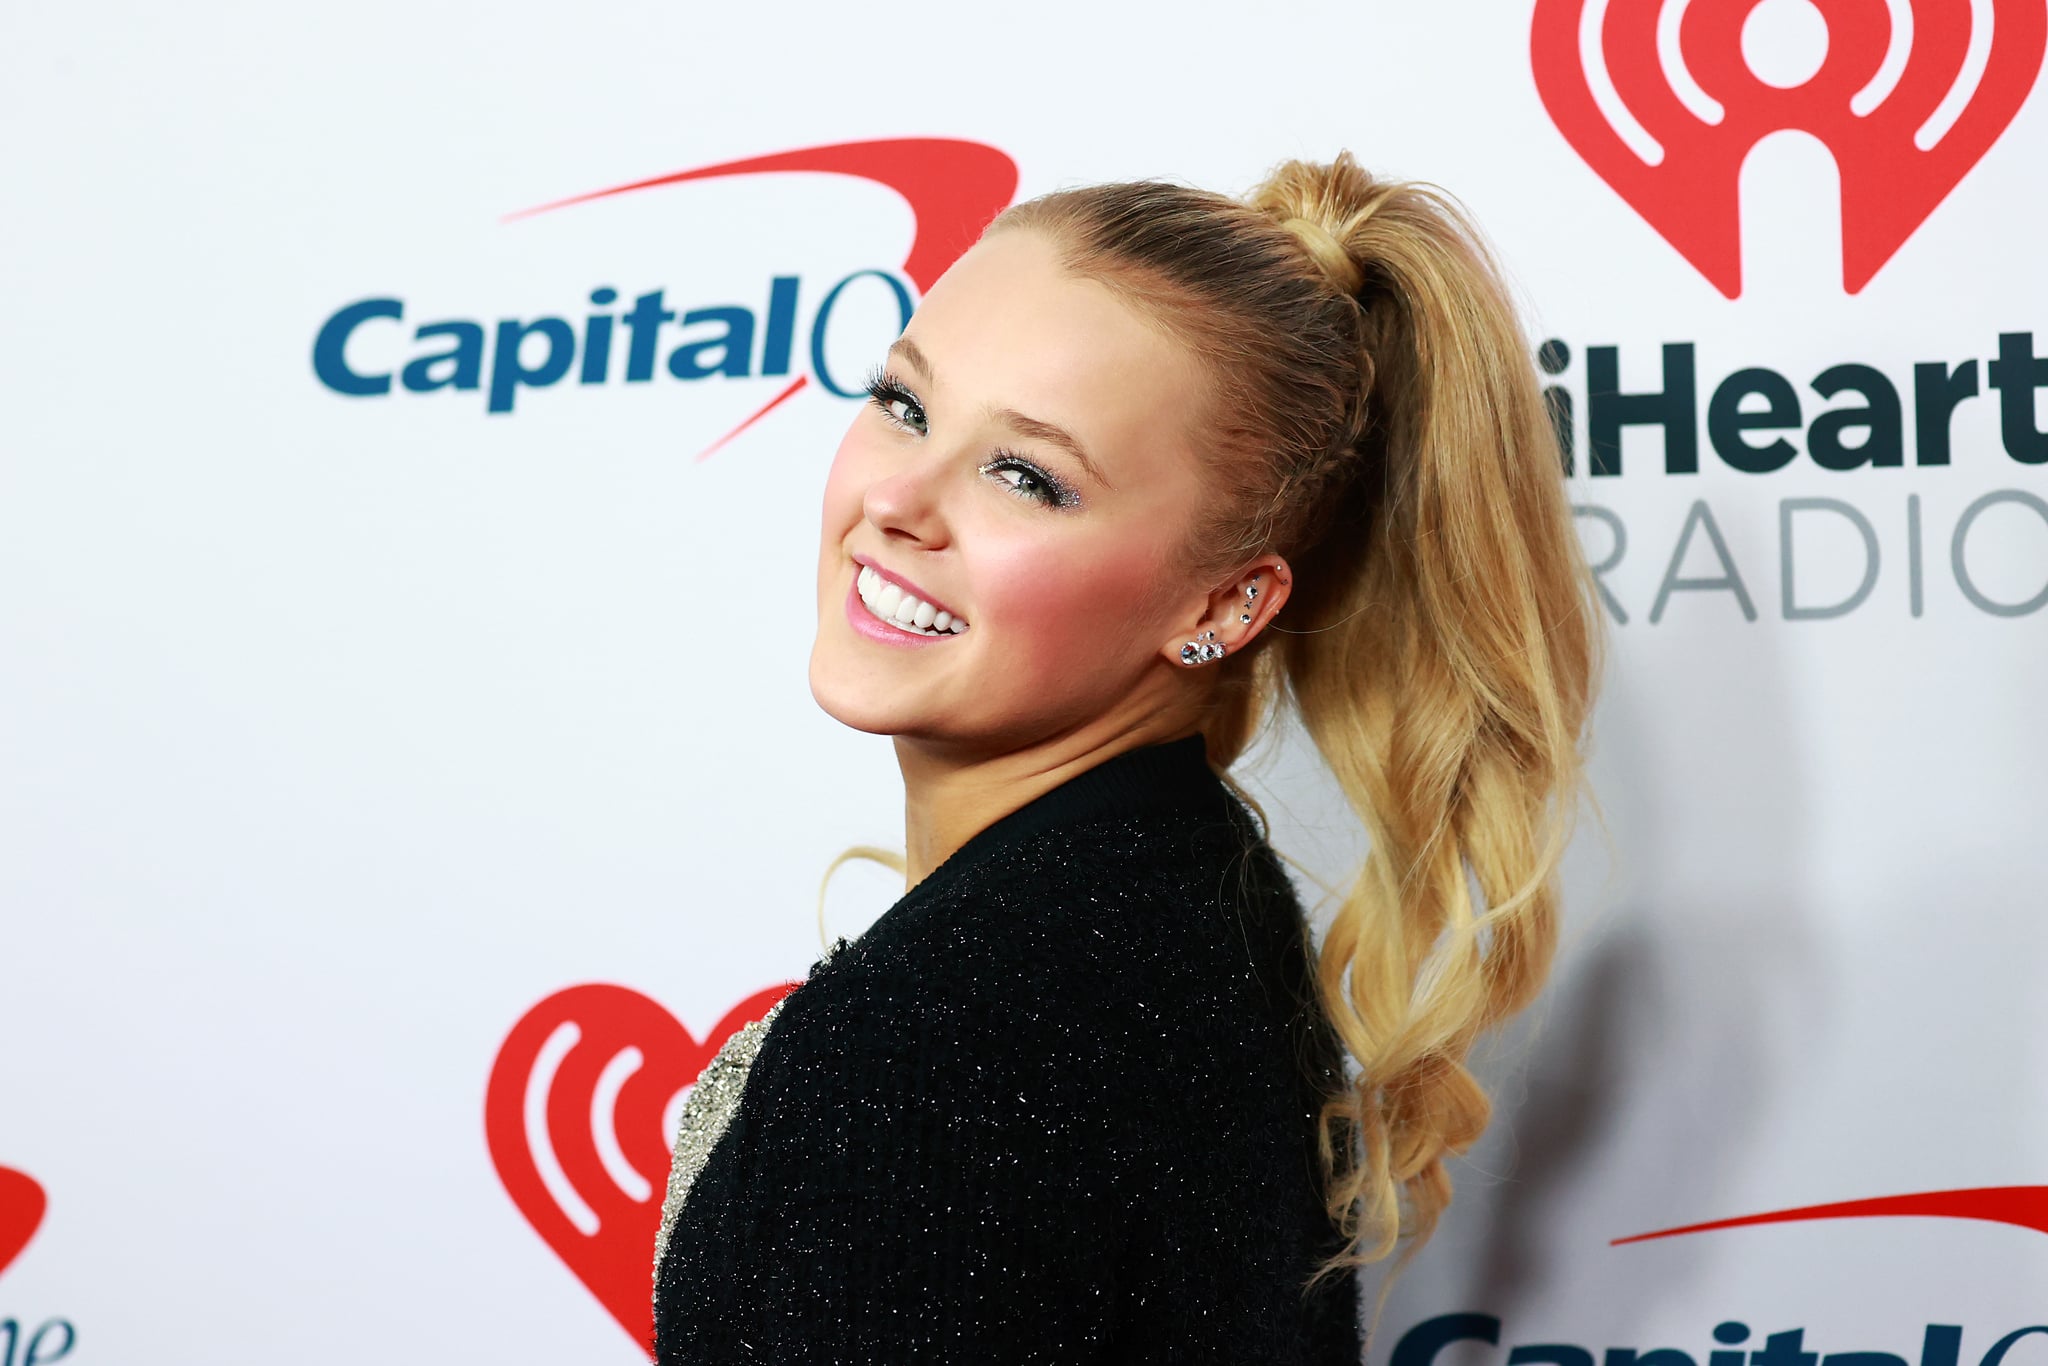 INGLEWOOD, CALIFORNIA - DECEMBER 03: (EDITORIAL USE ONLY) JoJo Siwa attends iHeartRadio 102.7 KIIS FM's Jingle Ball 2021 presented by Capital One at The Forum on December 03, 2021 in Los Angeles, California. (Photo by Matt Winkelmeyer/Getty Images for iHeartRadio)